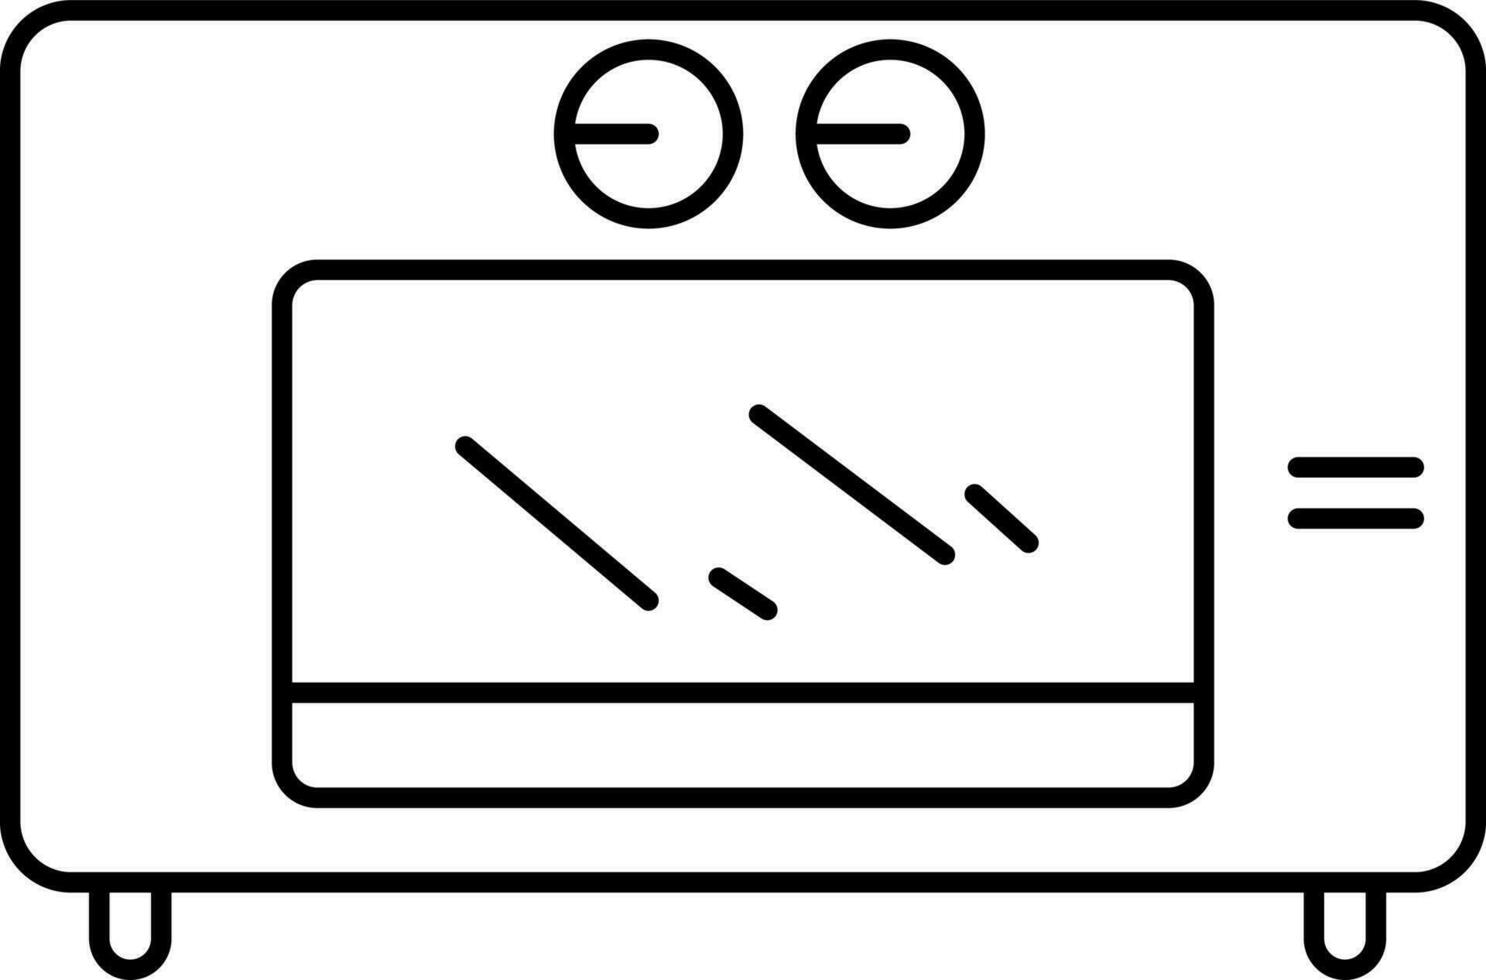 Black Outline Illustration Of Microwave Icon. vector